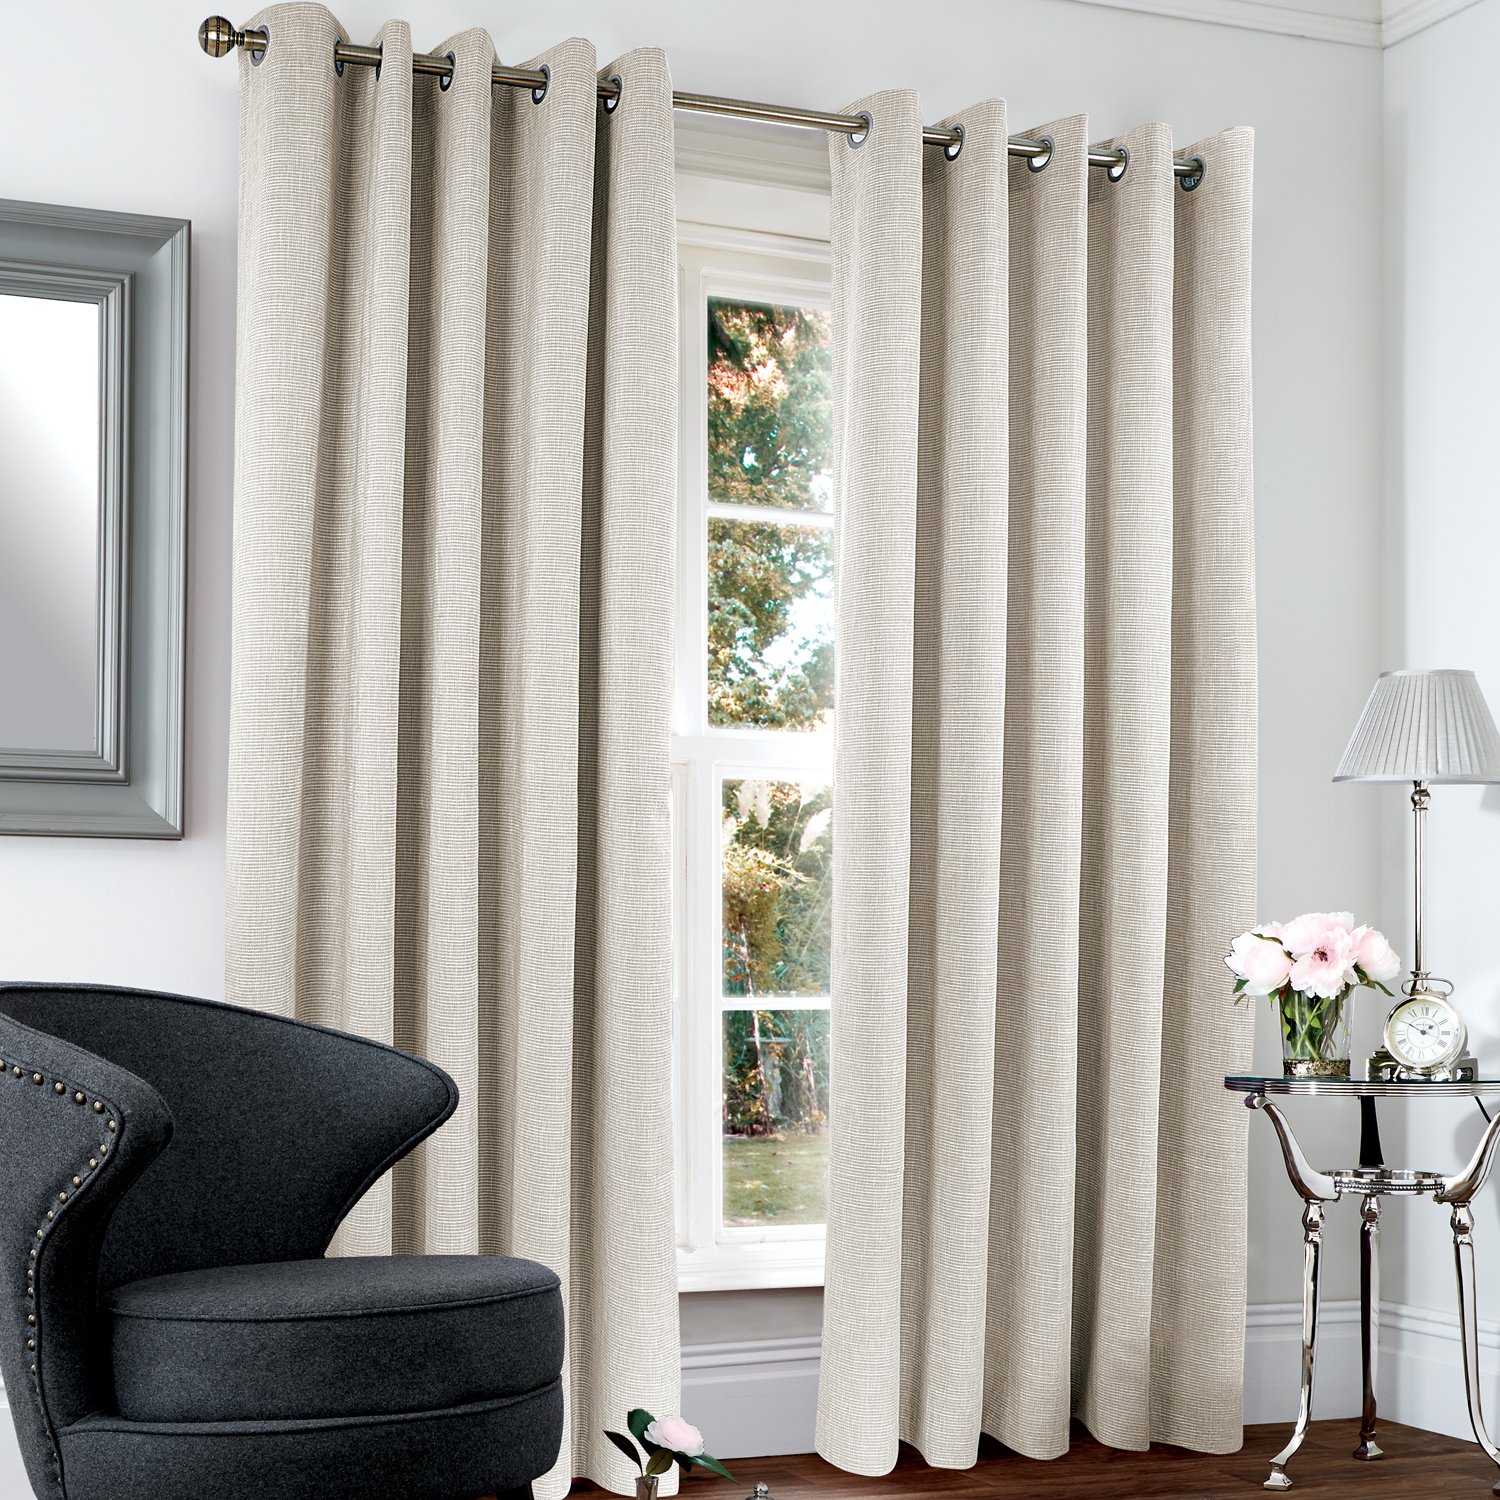 Blackout & Thermal Basketweave Curtains - Home Store + More